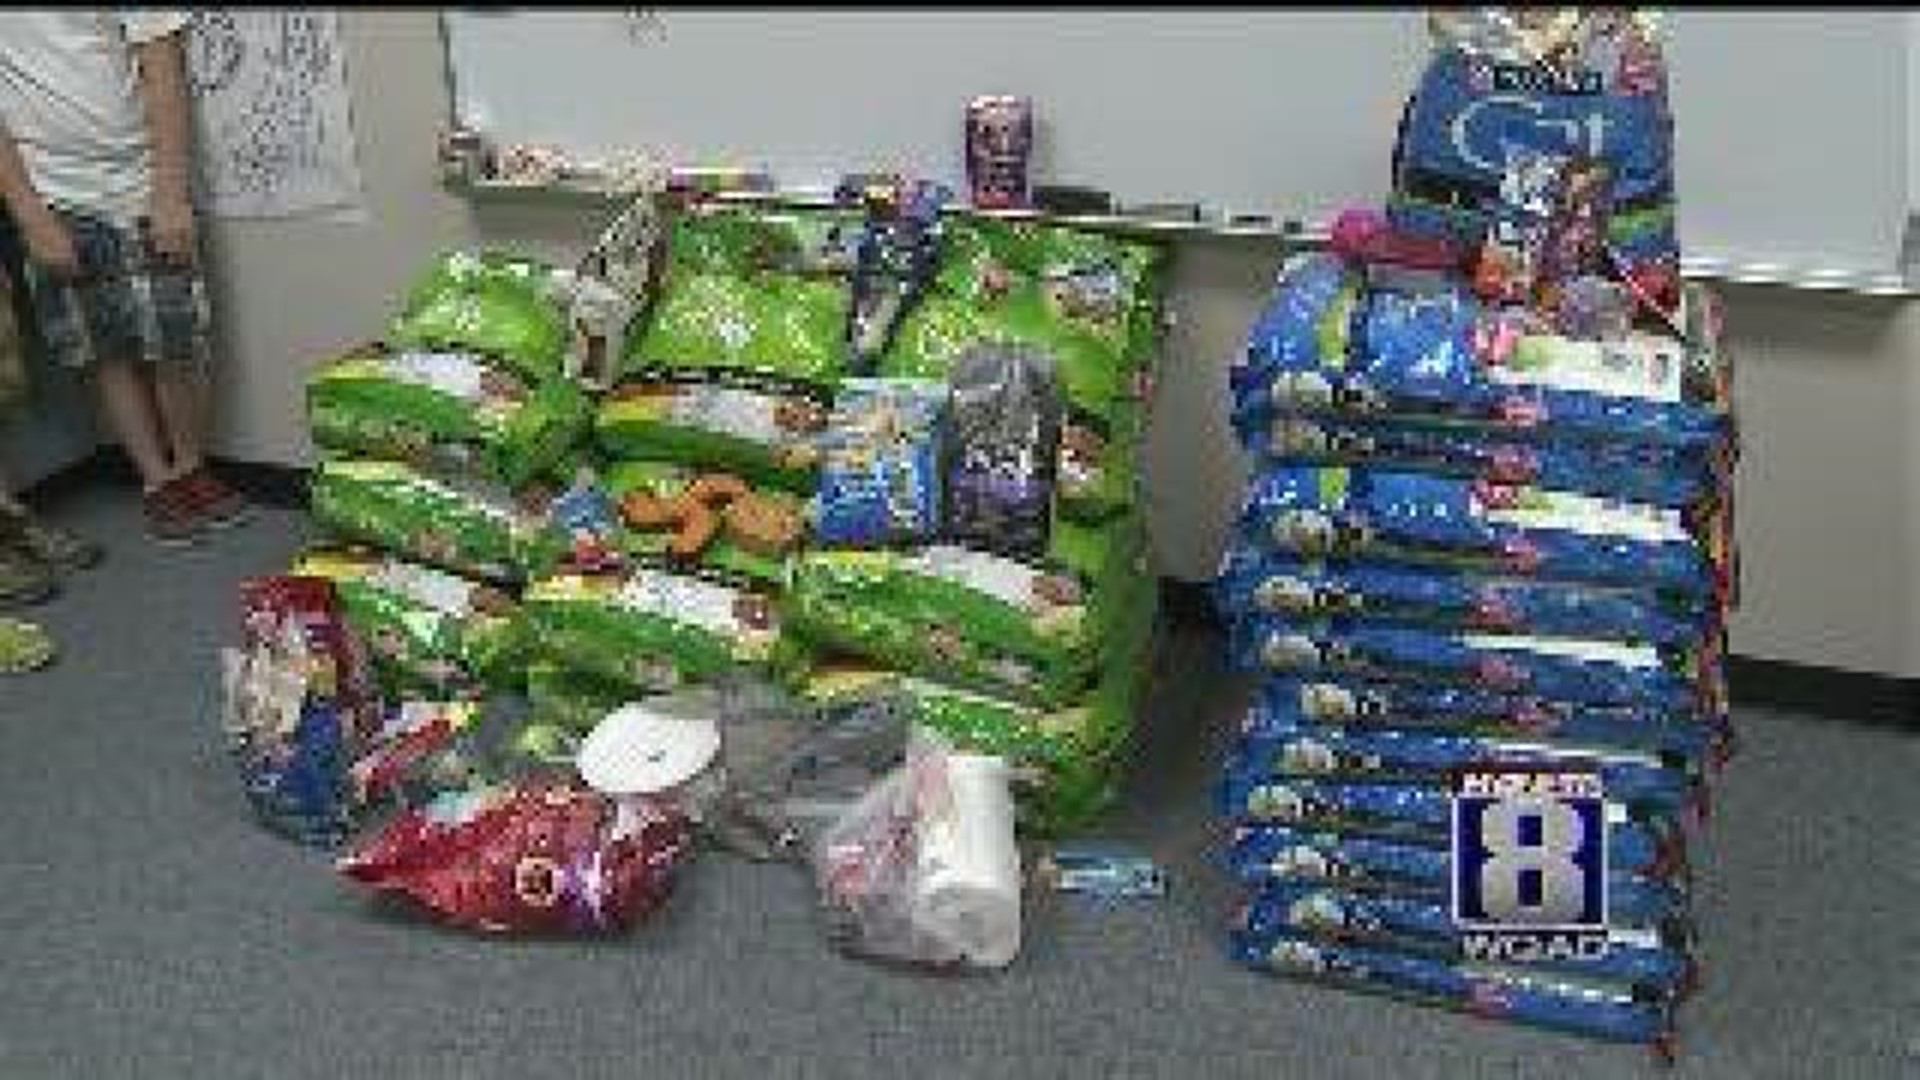 Local 6th Grade class donates money, food to animal shelter